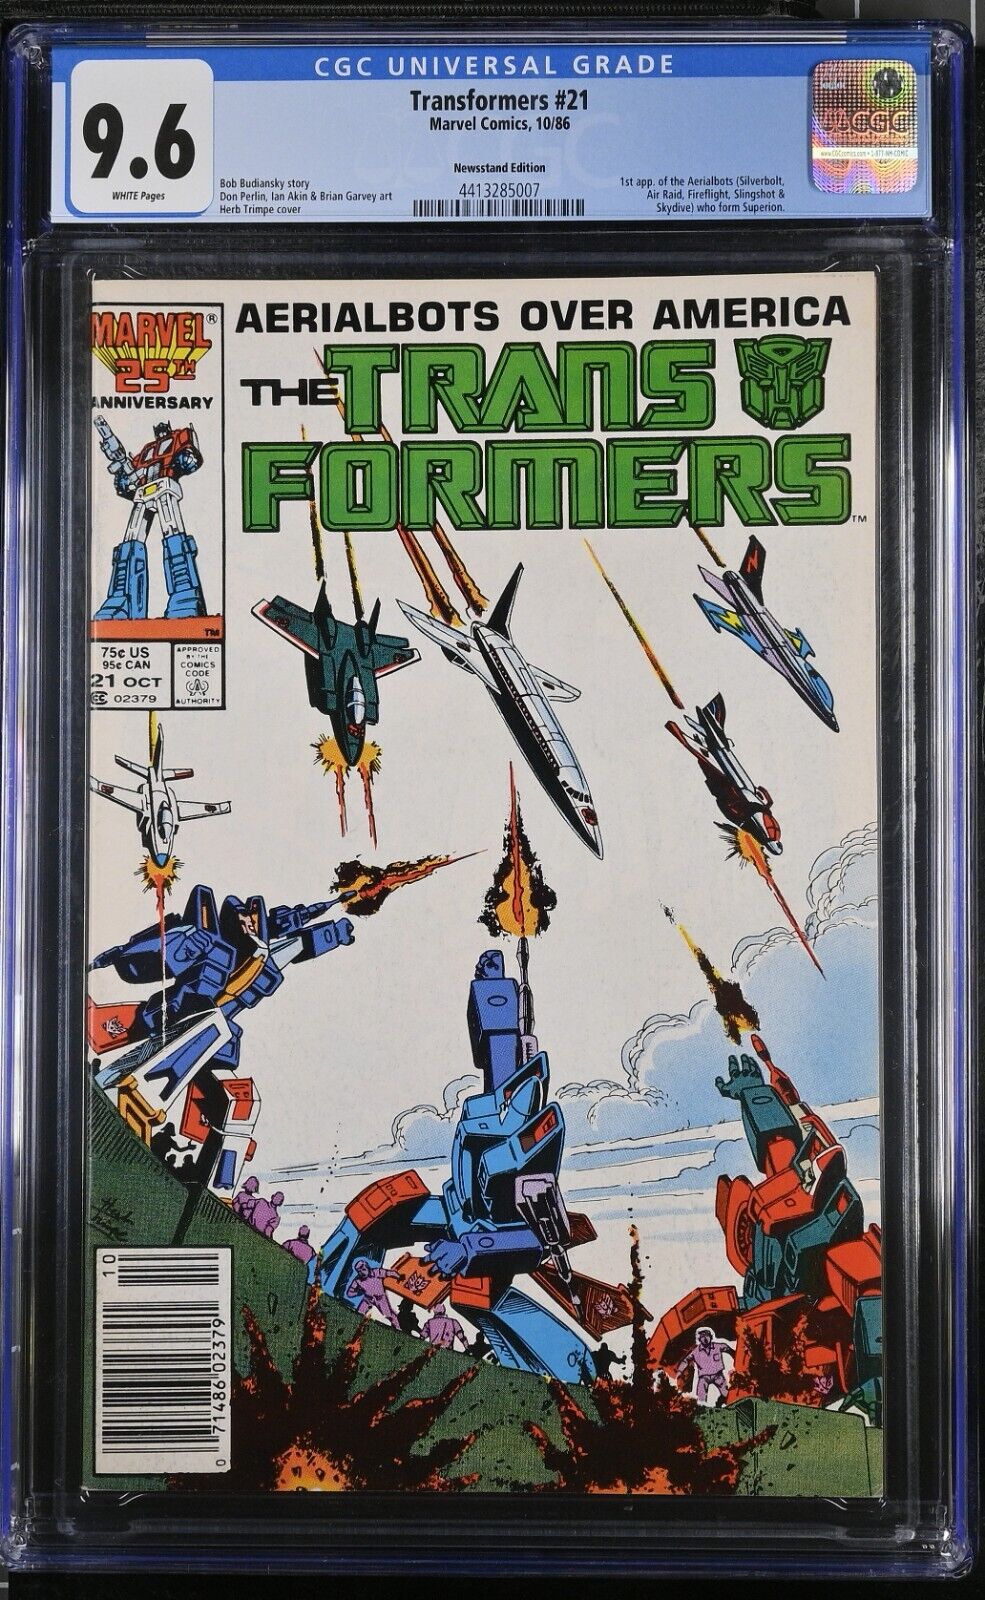 TRANSFORMERS #21 (1986) CGC 9.6 NEWSSTAND WHITE PAGES